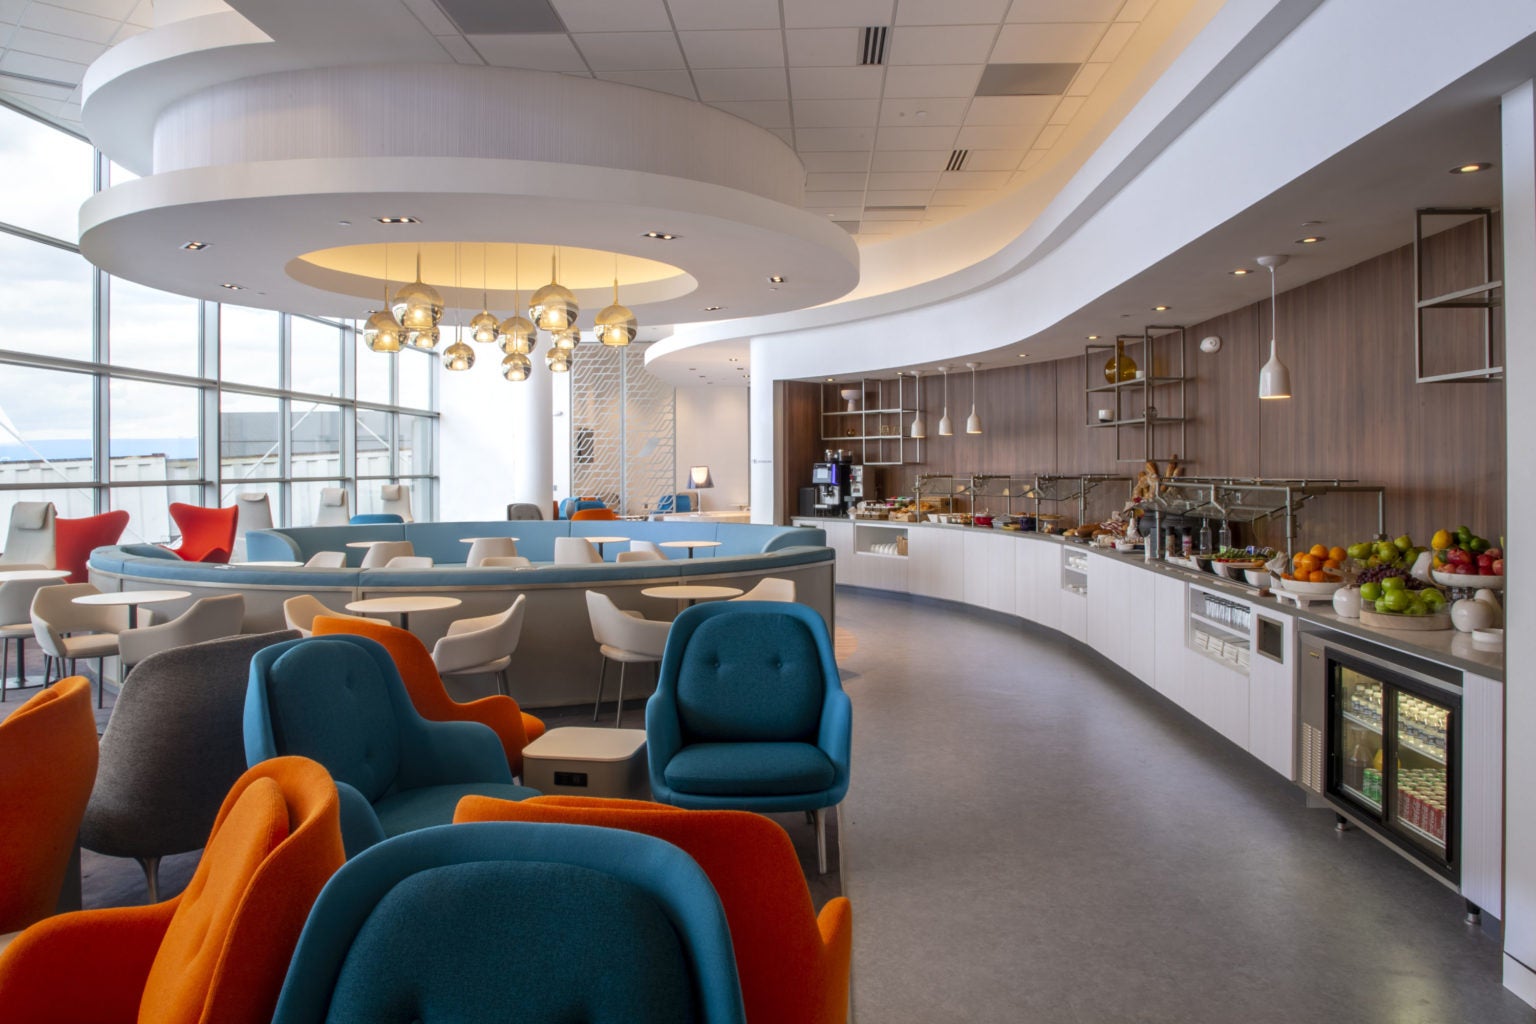 priority pass travel lounges